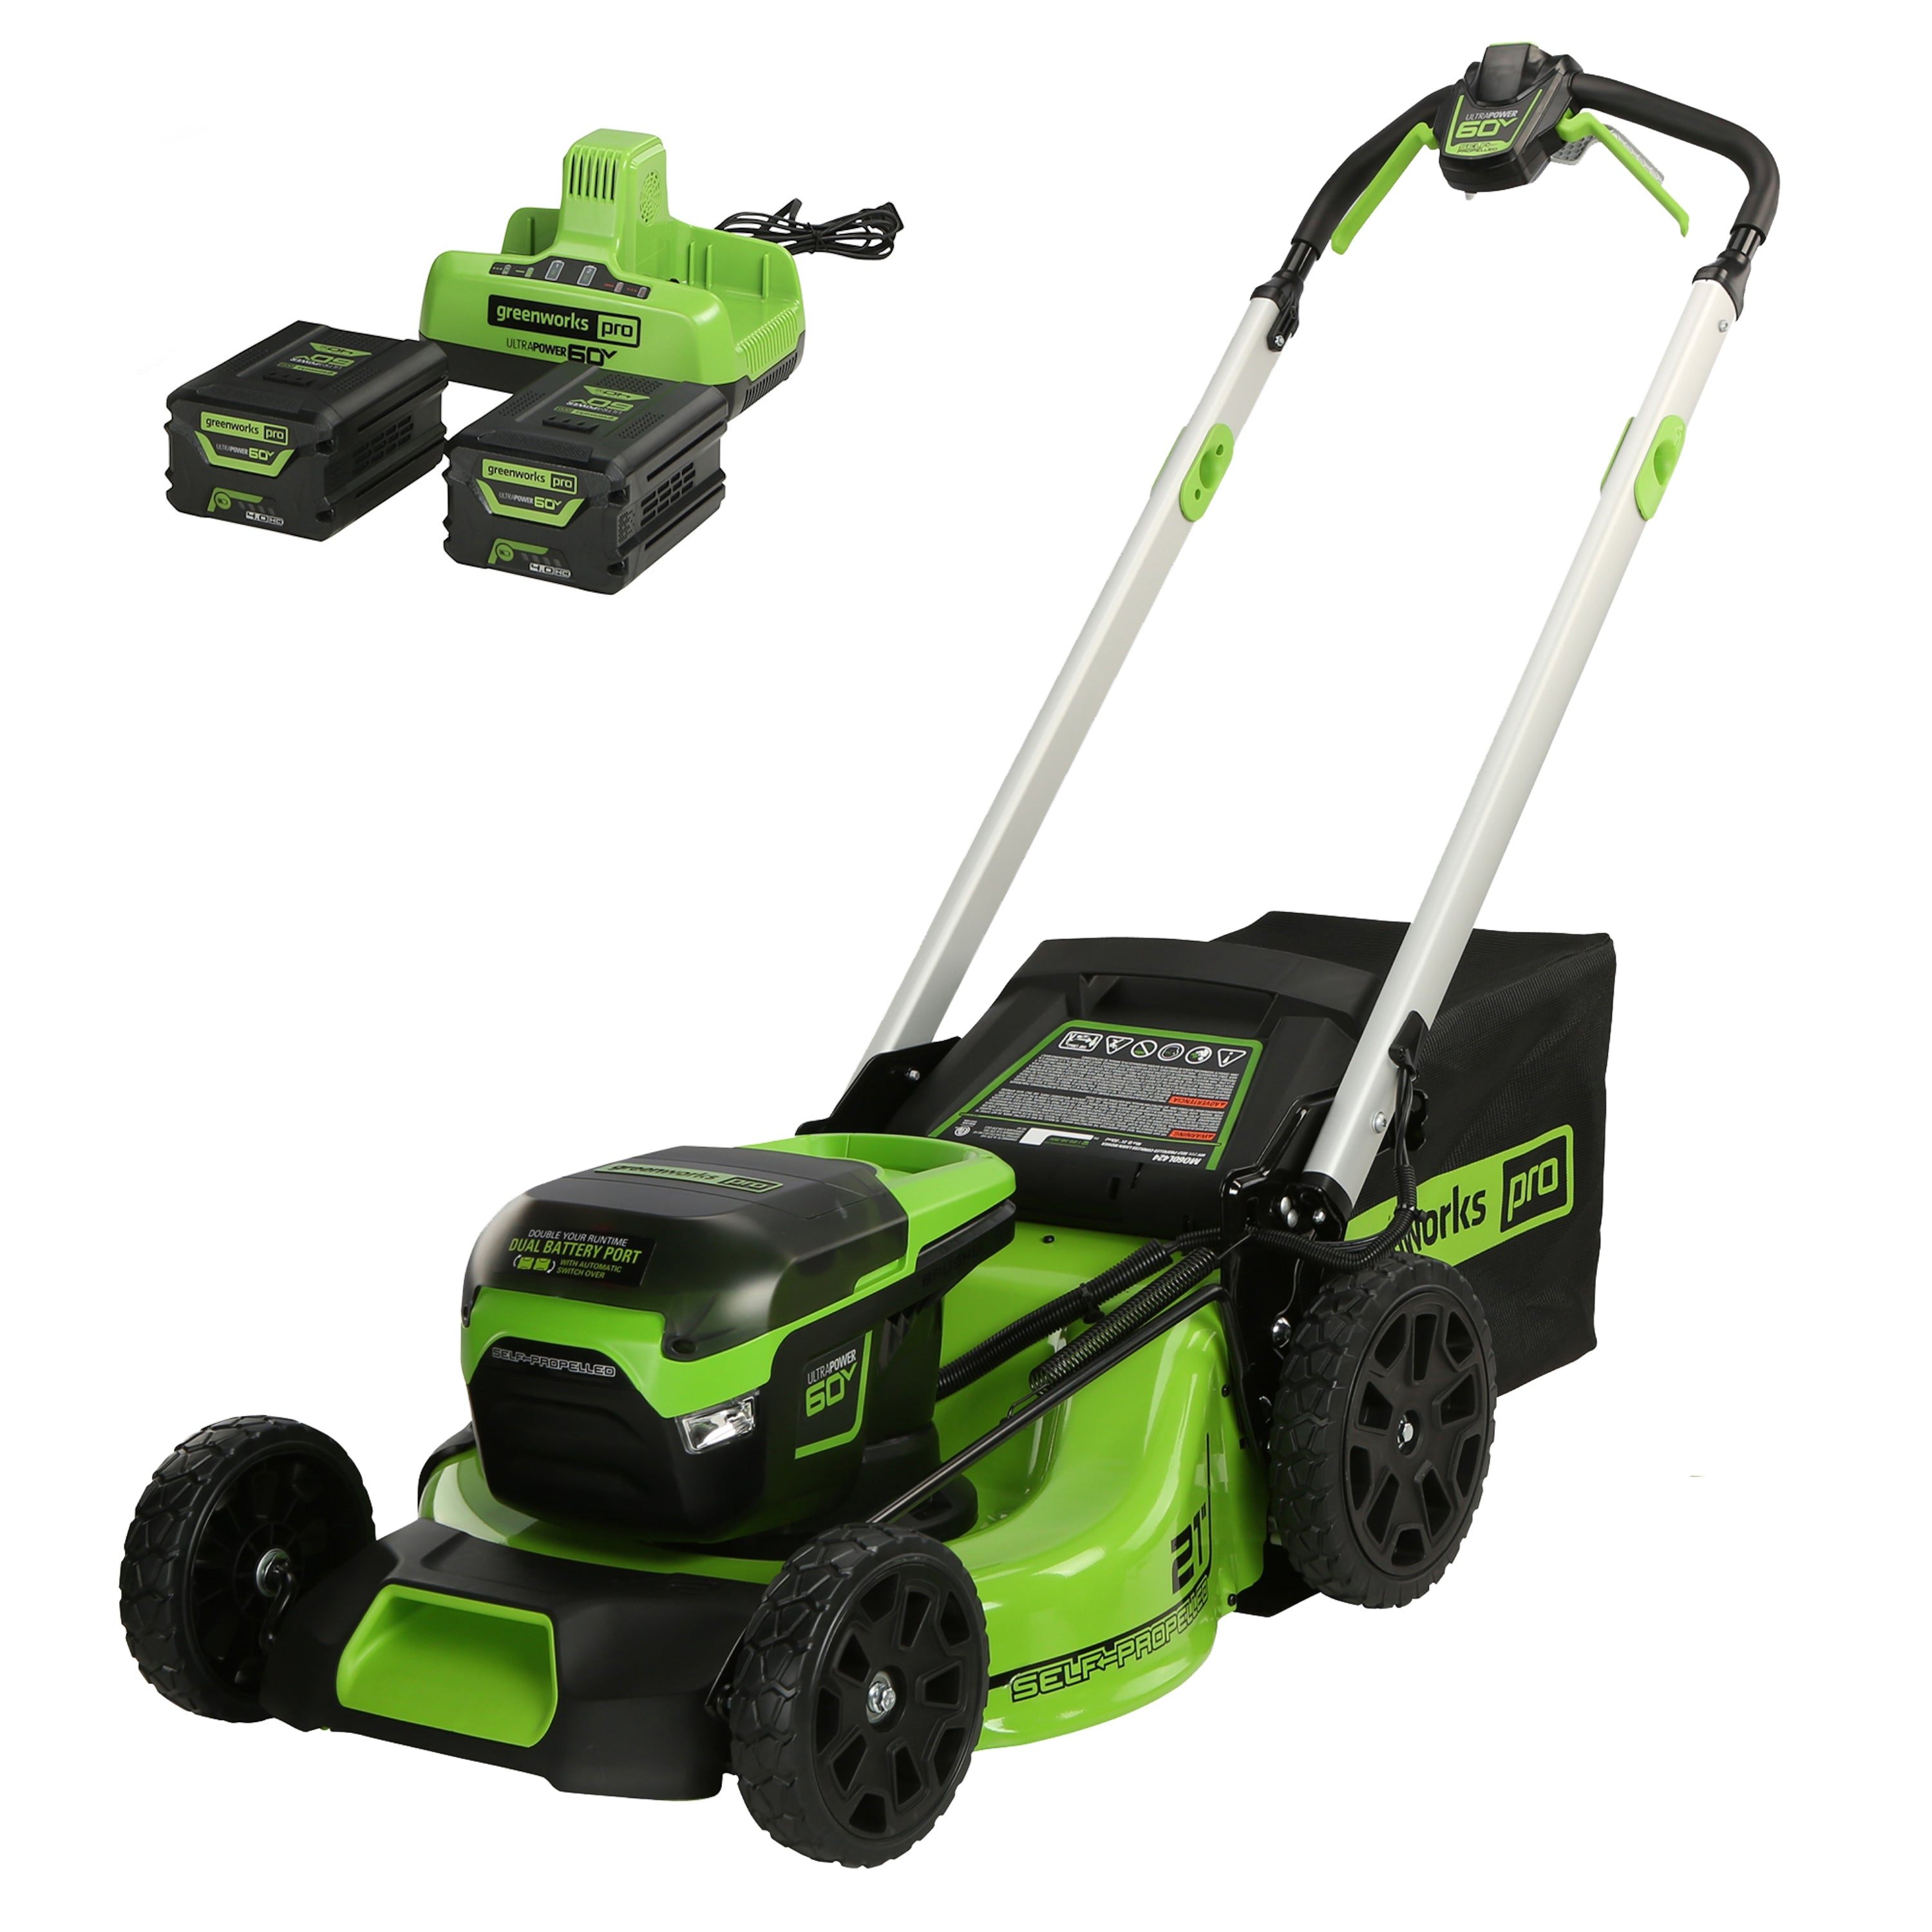 Greenworks 60V 21" Cordless Battery Self-Propelled Lawn Mower w/ Two (2) 4.0Ah Batteries & Dual Port Charger $450